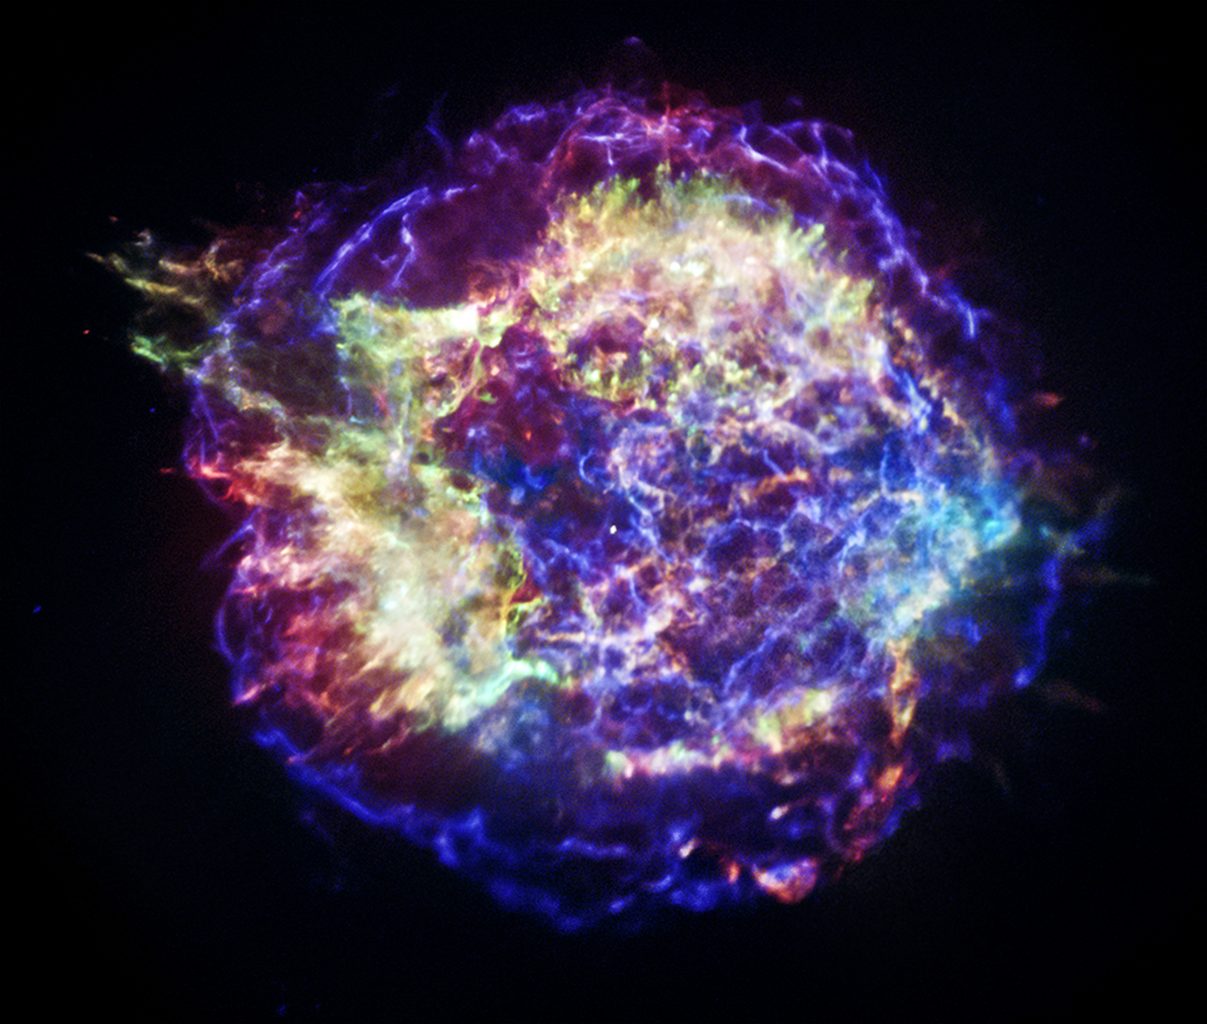 Composite image of Cassiopeia A from 2005 made from combined data from Chandra, Hubble, and Spitzer. Credit: NASA/JPL-Caltech